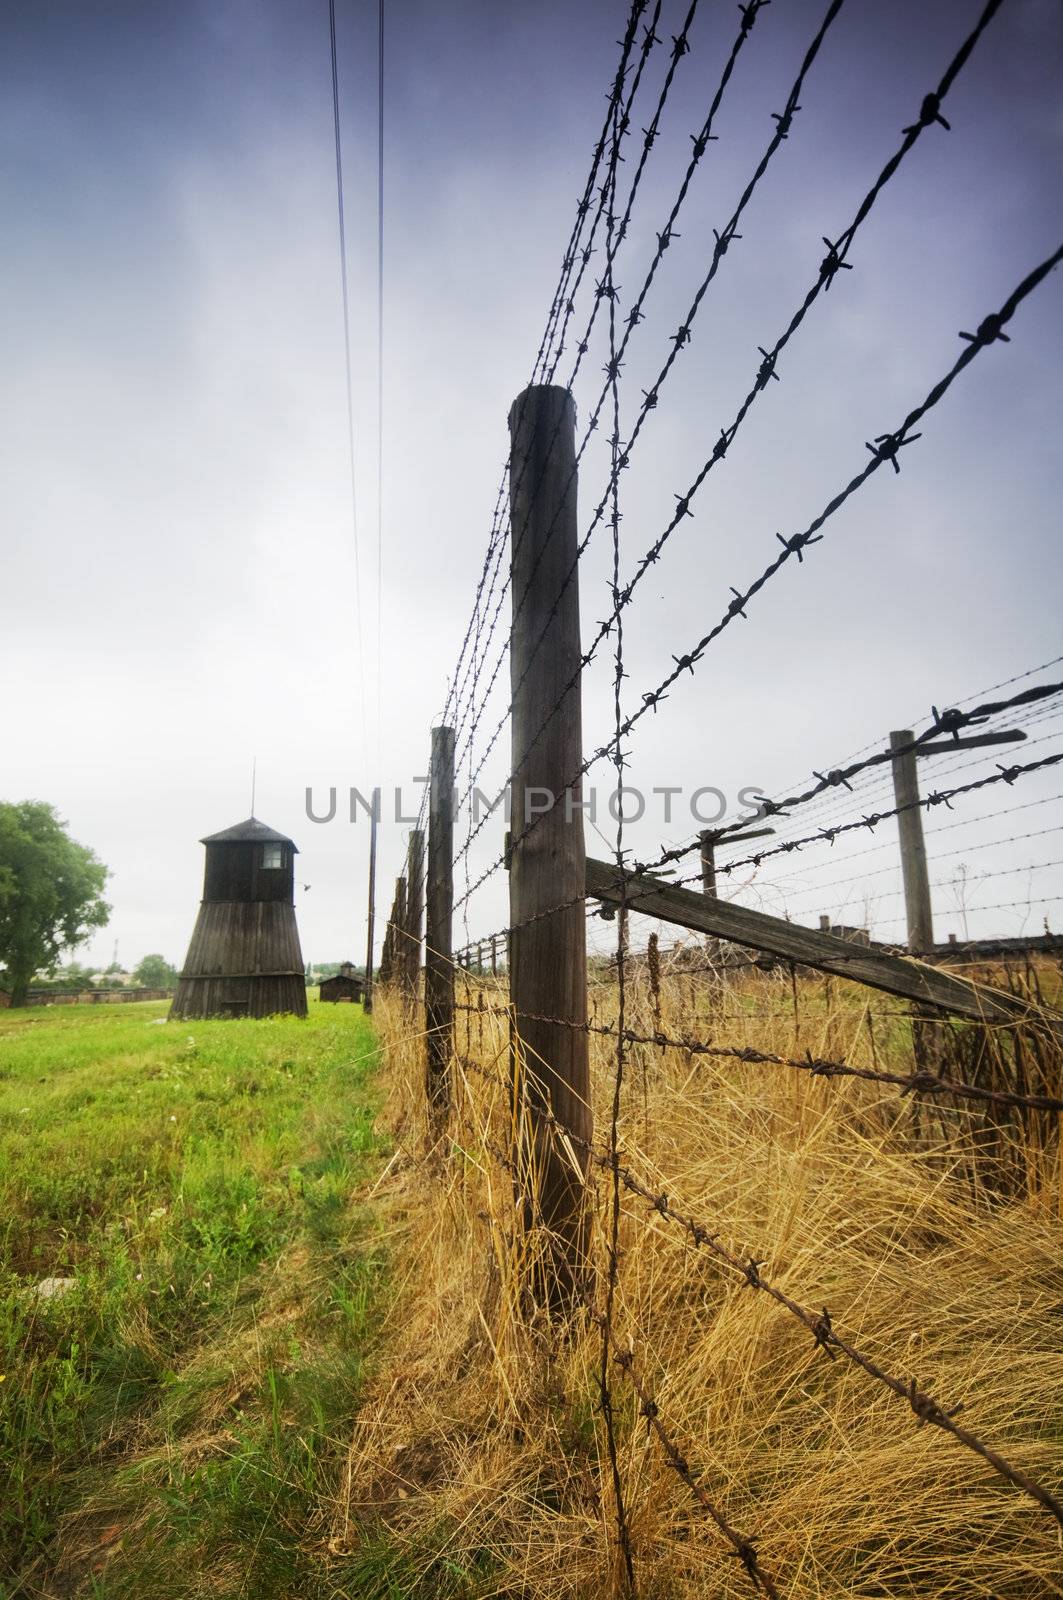 Barbed wire fence to prison by photocreo